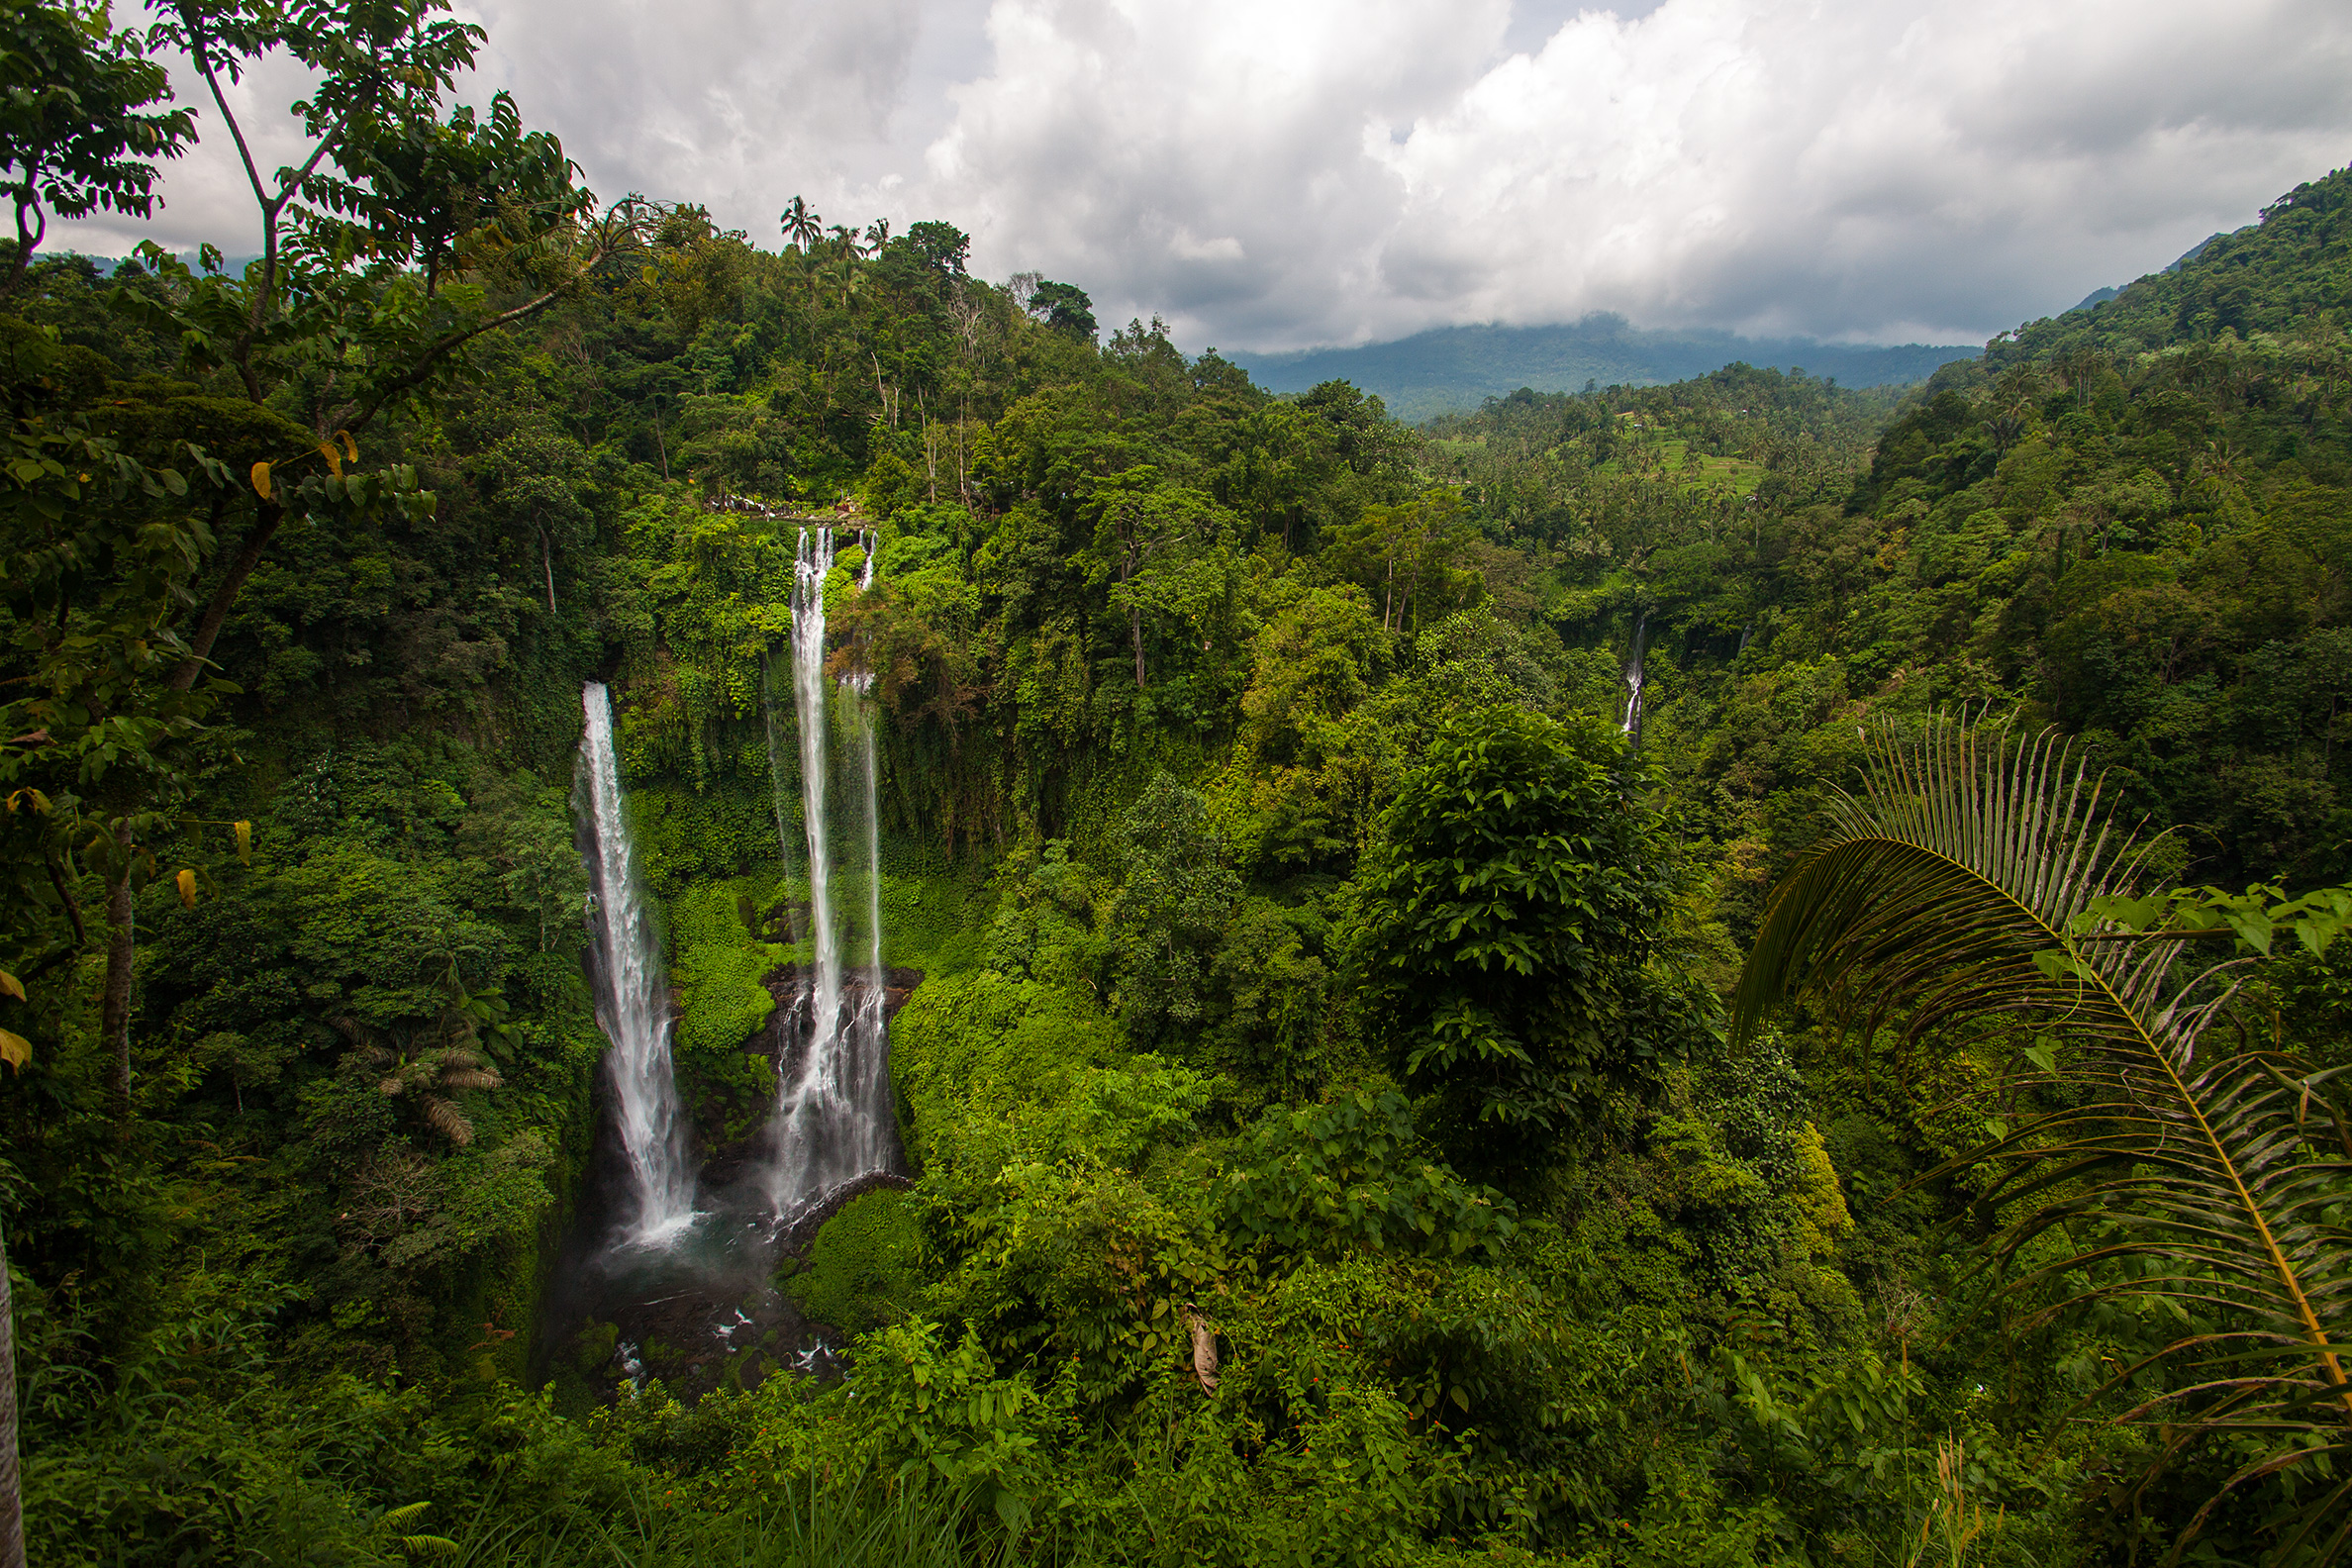 Landscape Indonesia Waterfall Asia Nature Jungle Plants Trees 2376x1584